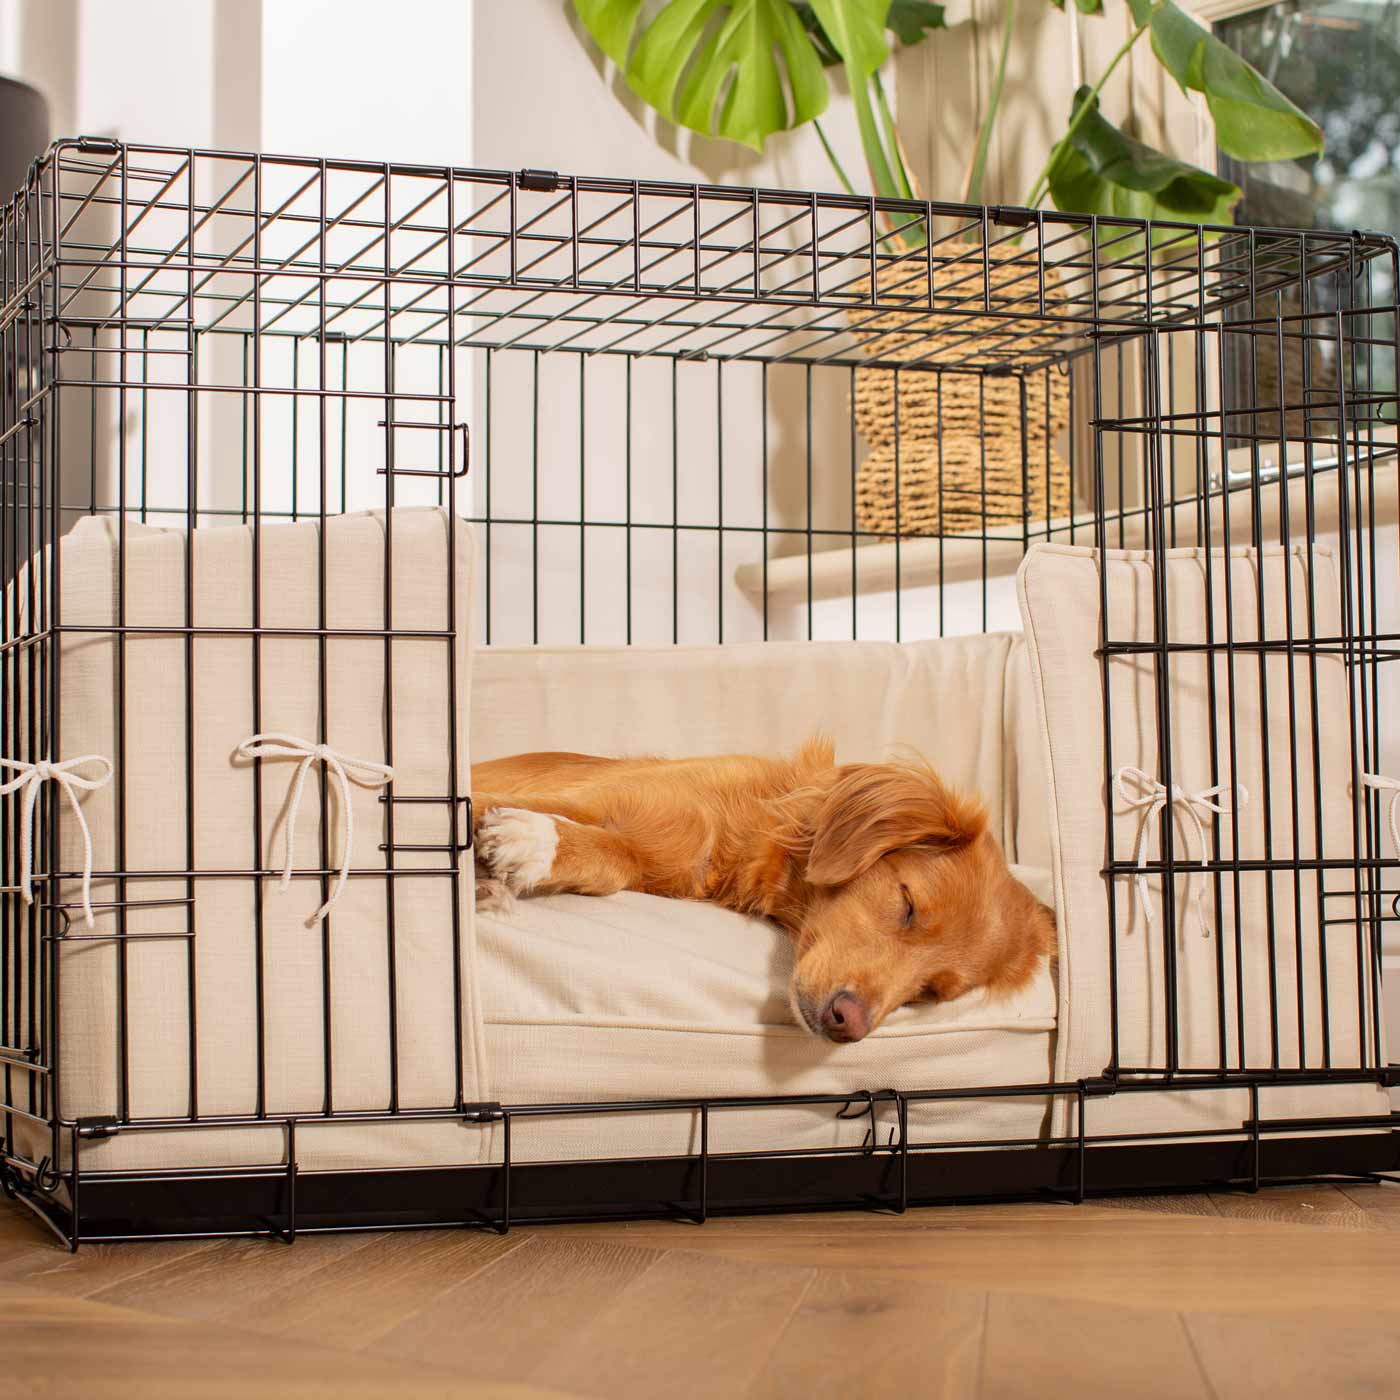 [color:savanna bone] Accessorize your dog cage with our stunning bumper covers, choose from our Savanna collection! Made using luxury fabric for the perfect cage accessory to build the ultimate dog den! Available now in 3 colors and sizes at Lords & Labradors US